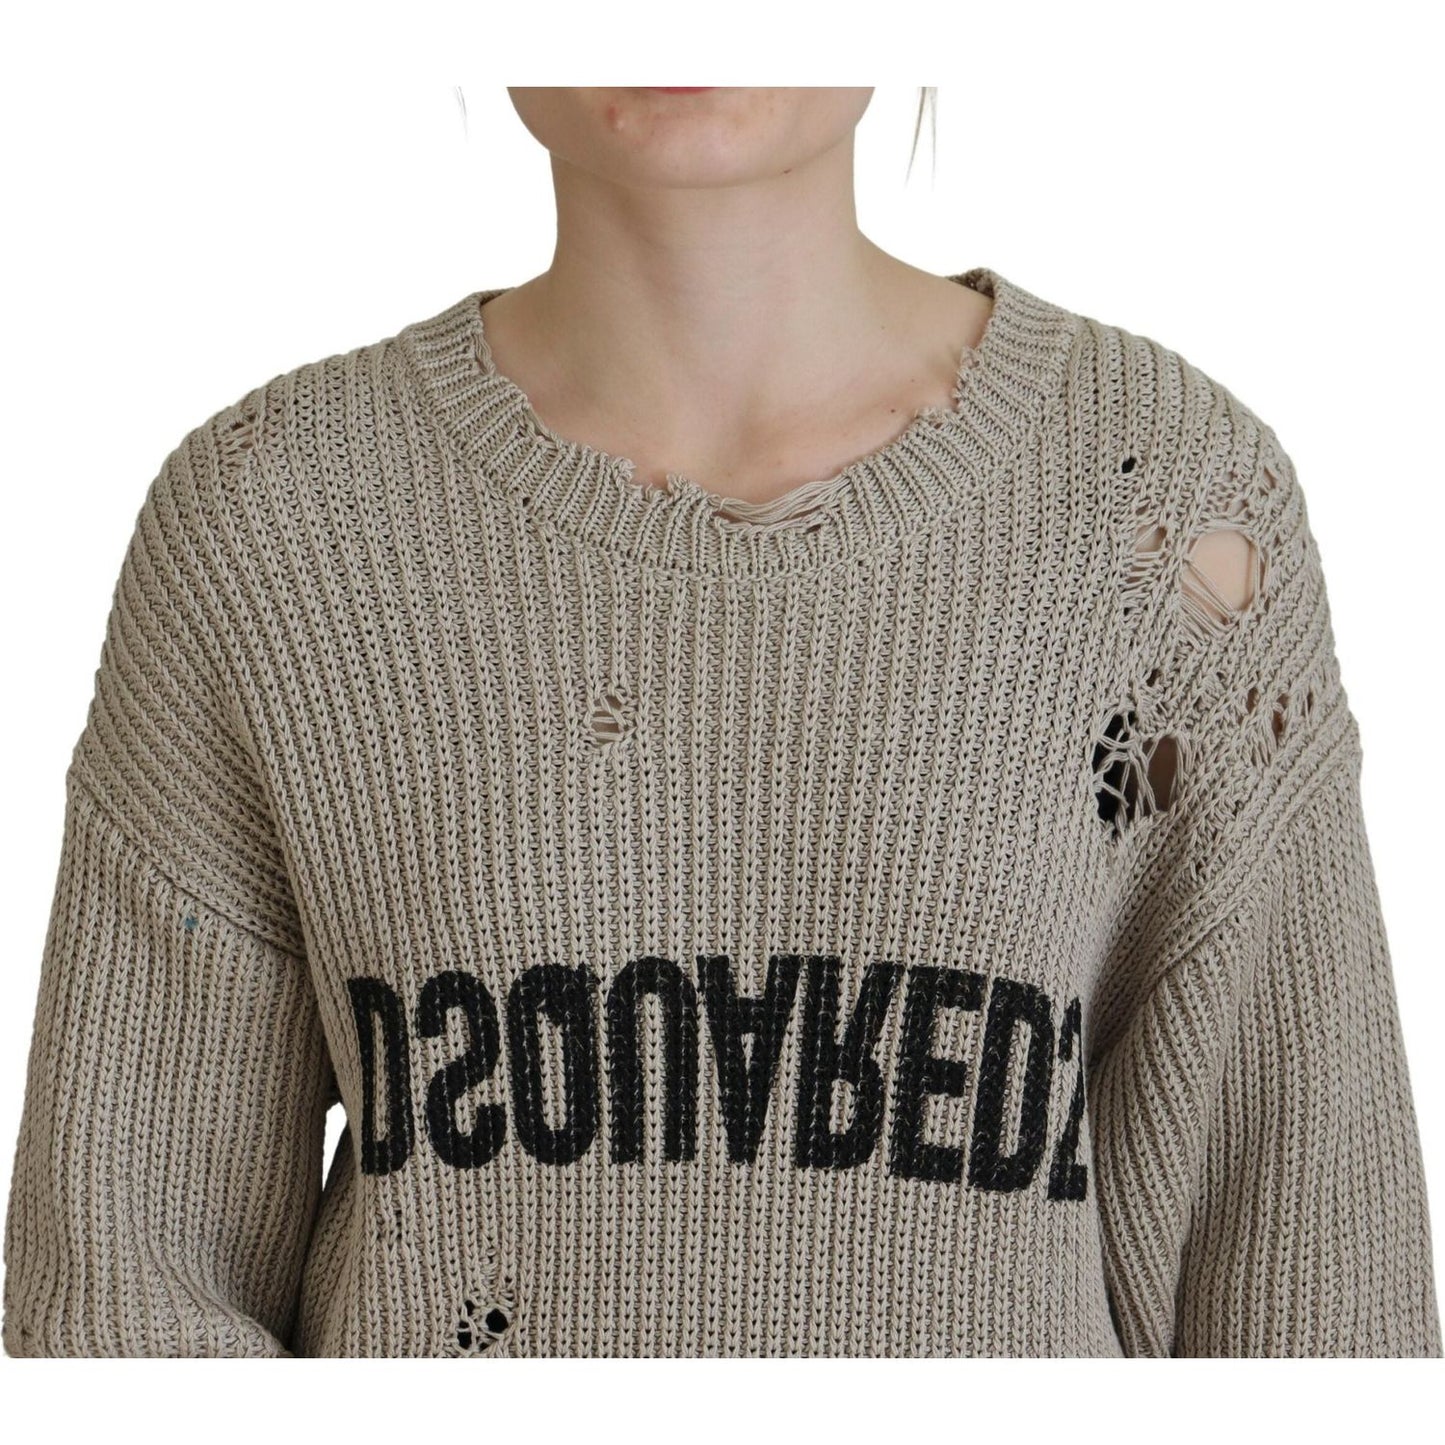 Dsquared² Beige Cotton Knitted Crewneck Pullover Sweater beige-cotton-knitted-crewneck-pullover-sweater